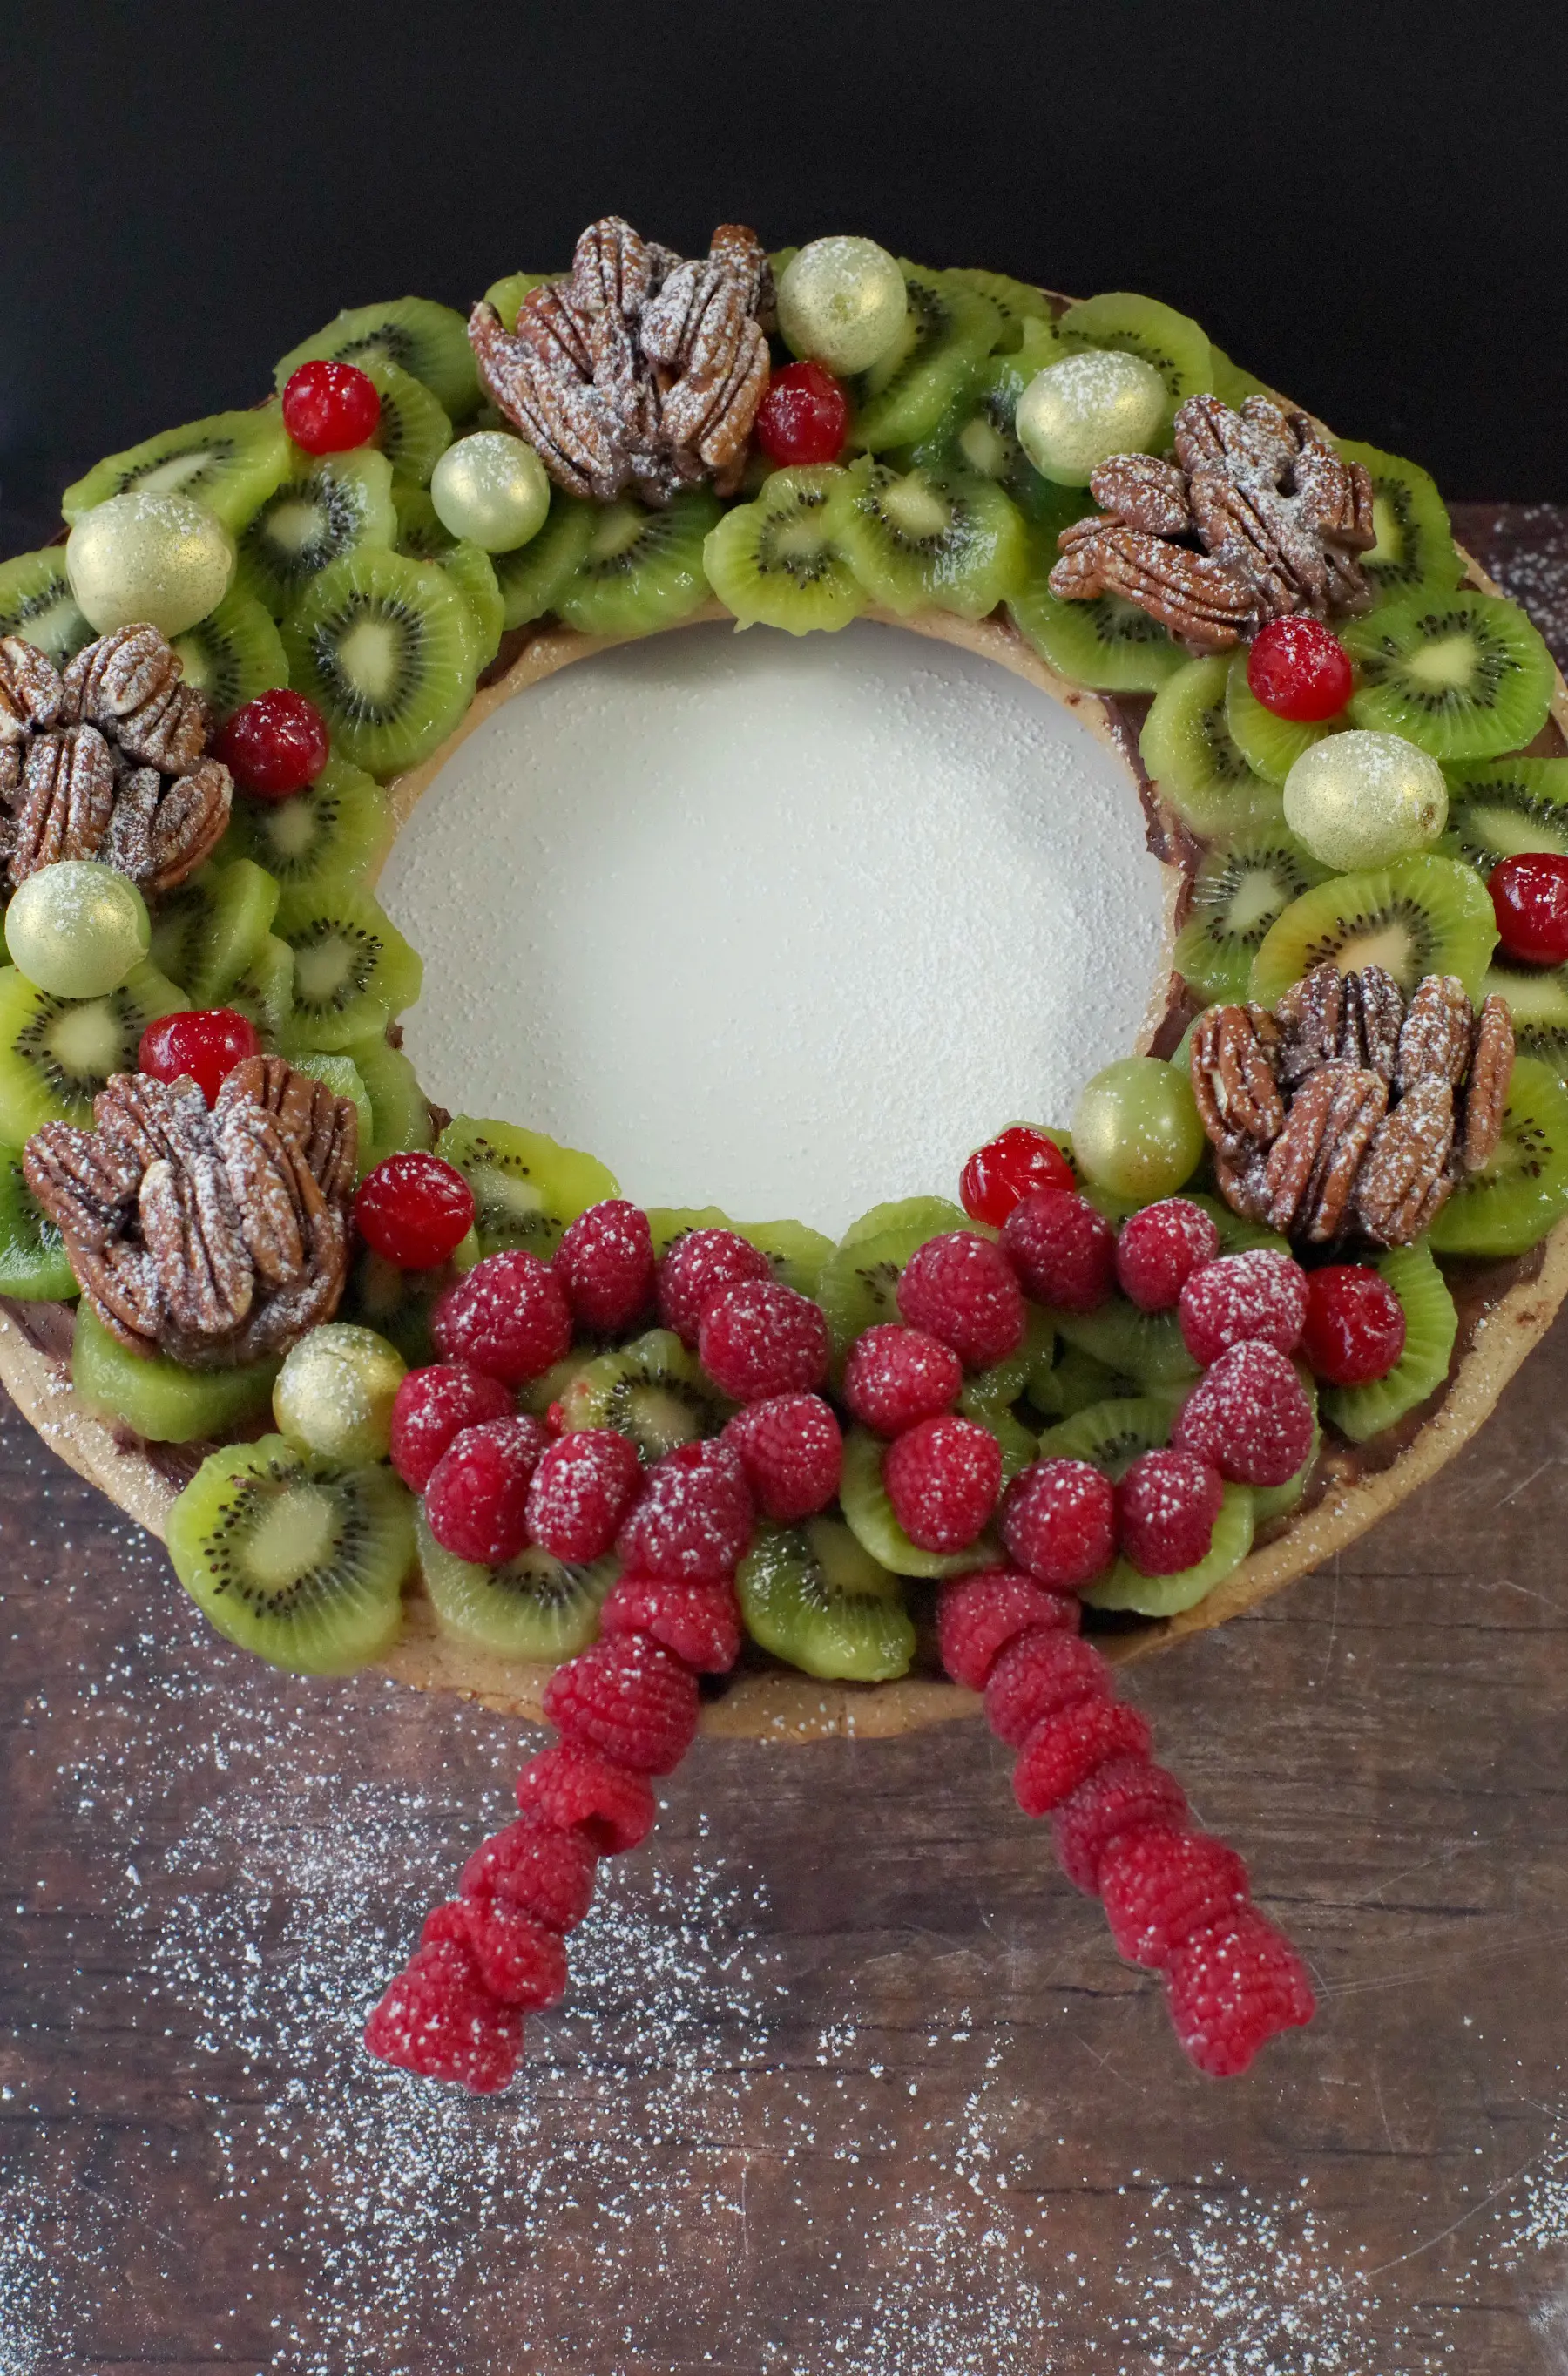 Gingerbread Edible Christmas Wreath with fruit and nuts, on brown wooden surface with powdered sugar sprinkles